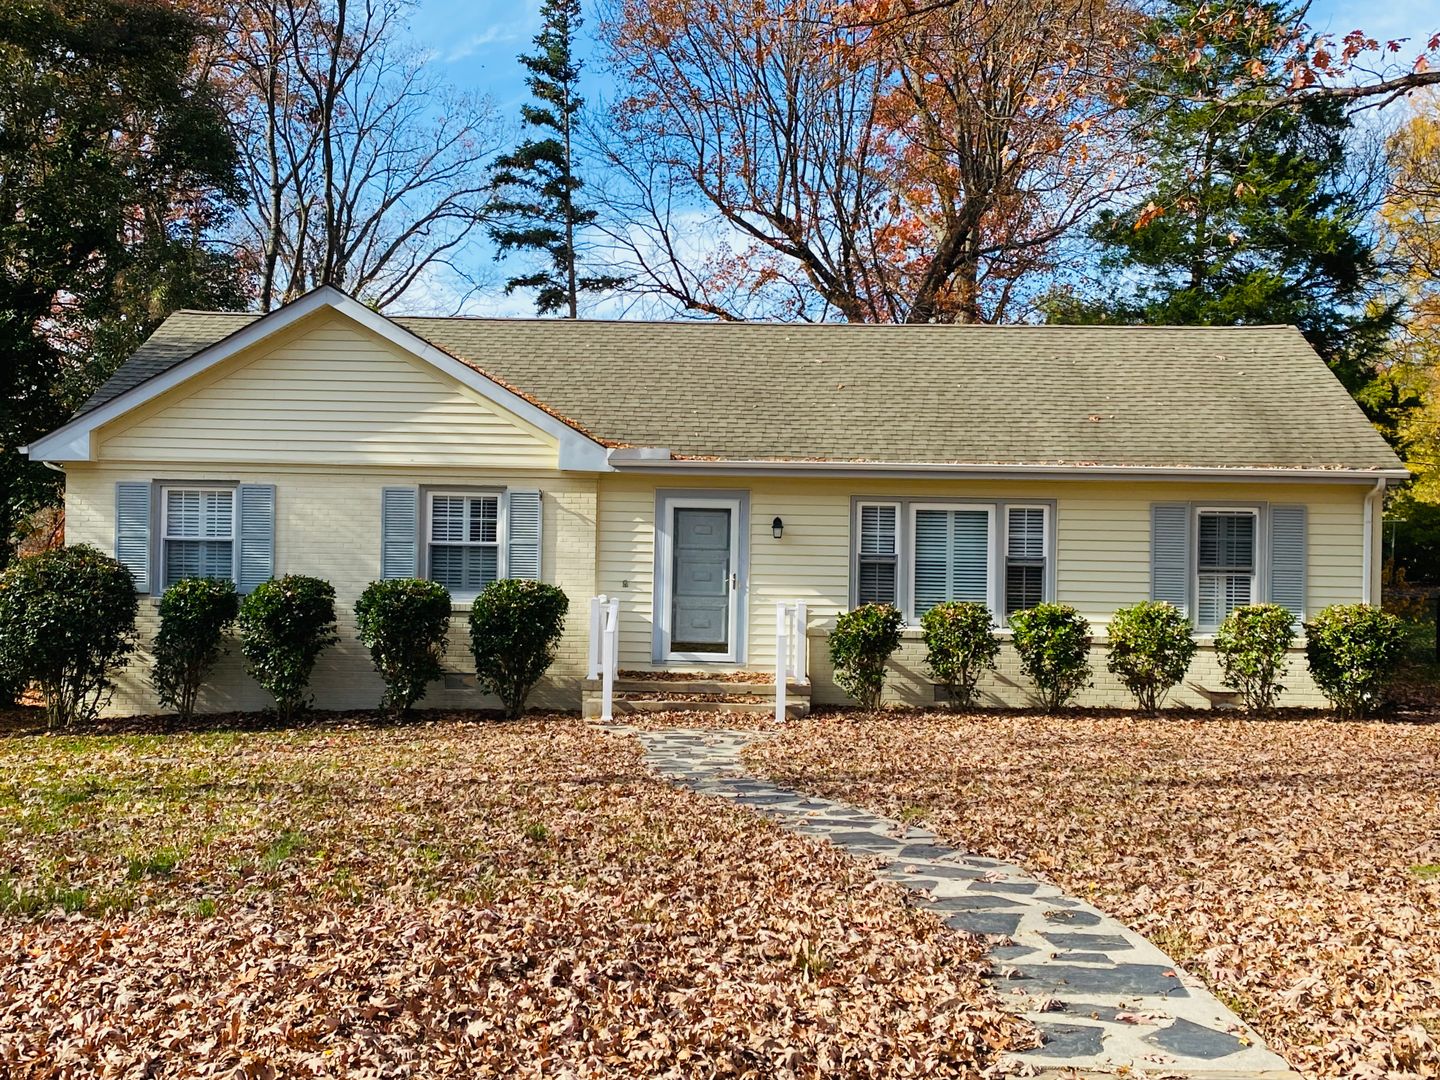 Beautifully Updated 3bdrm/2bth Ranch Style Home Located in Tuckahoe!!